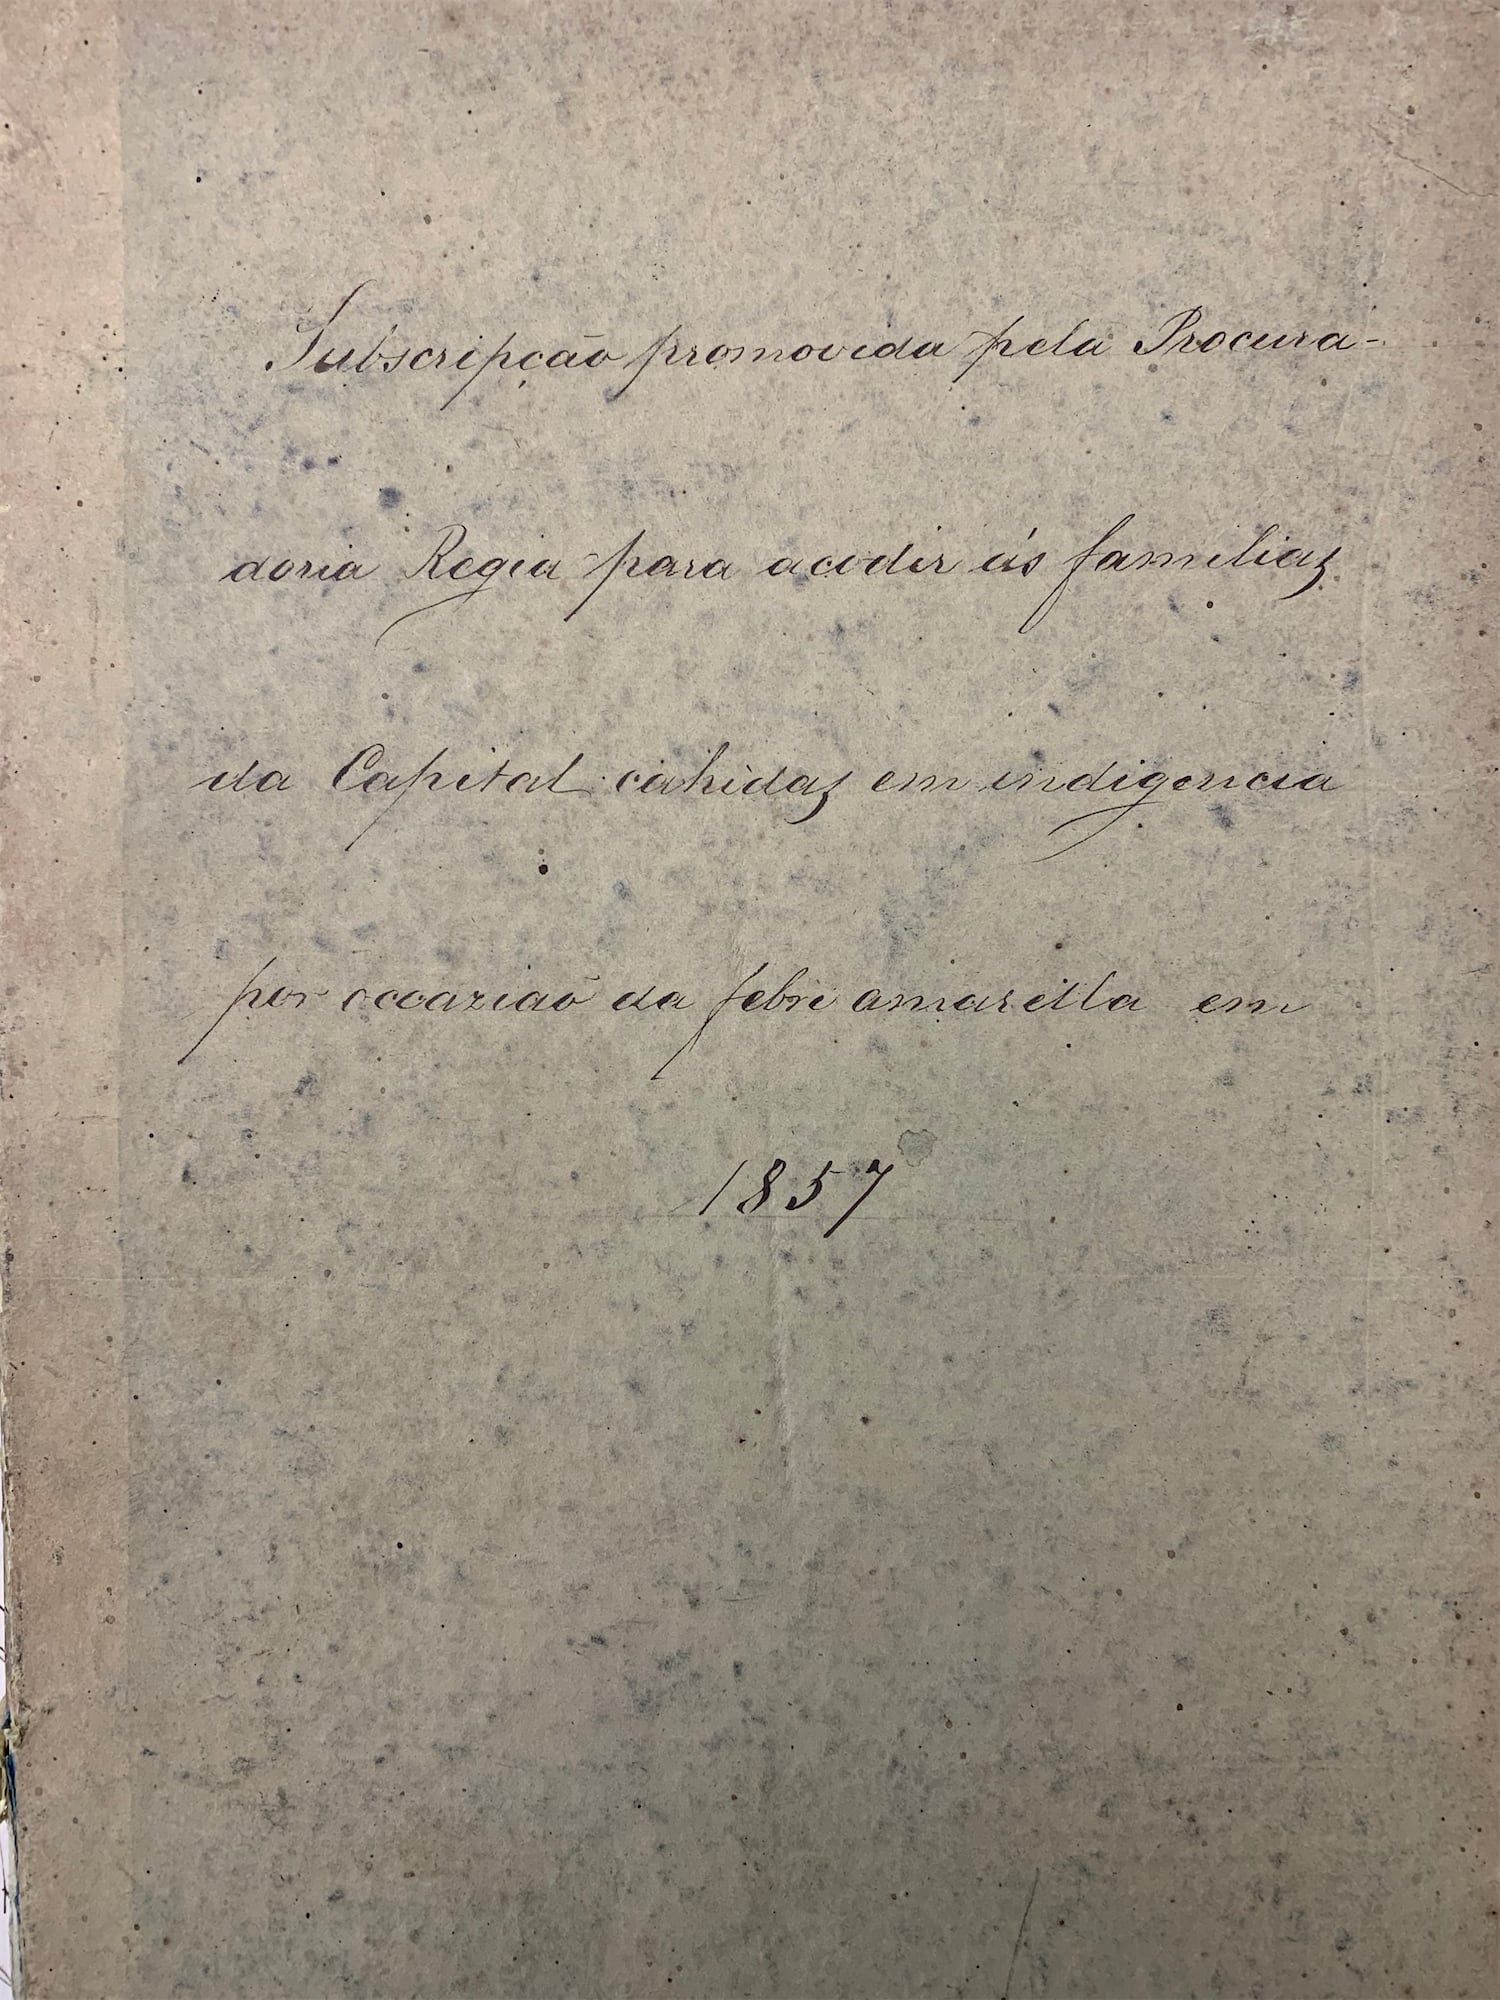 Donation Book for the Poor of the Capital, 1857